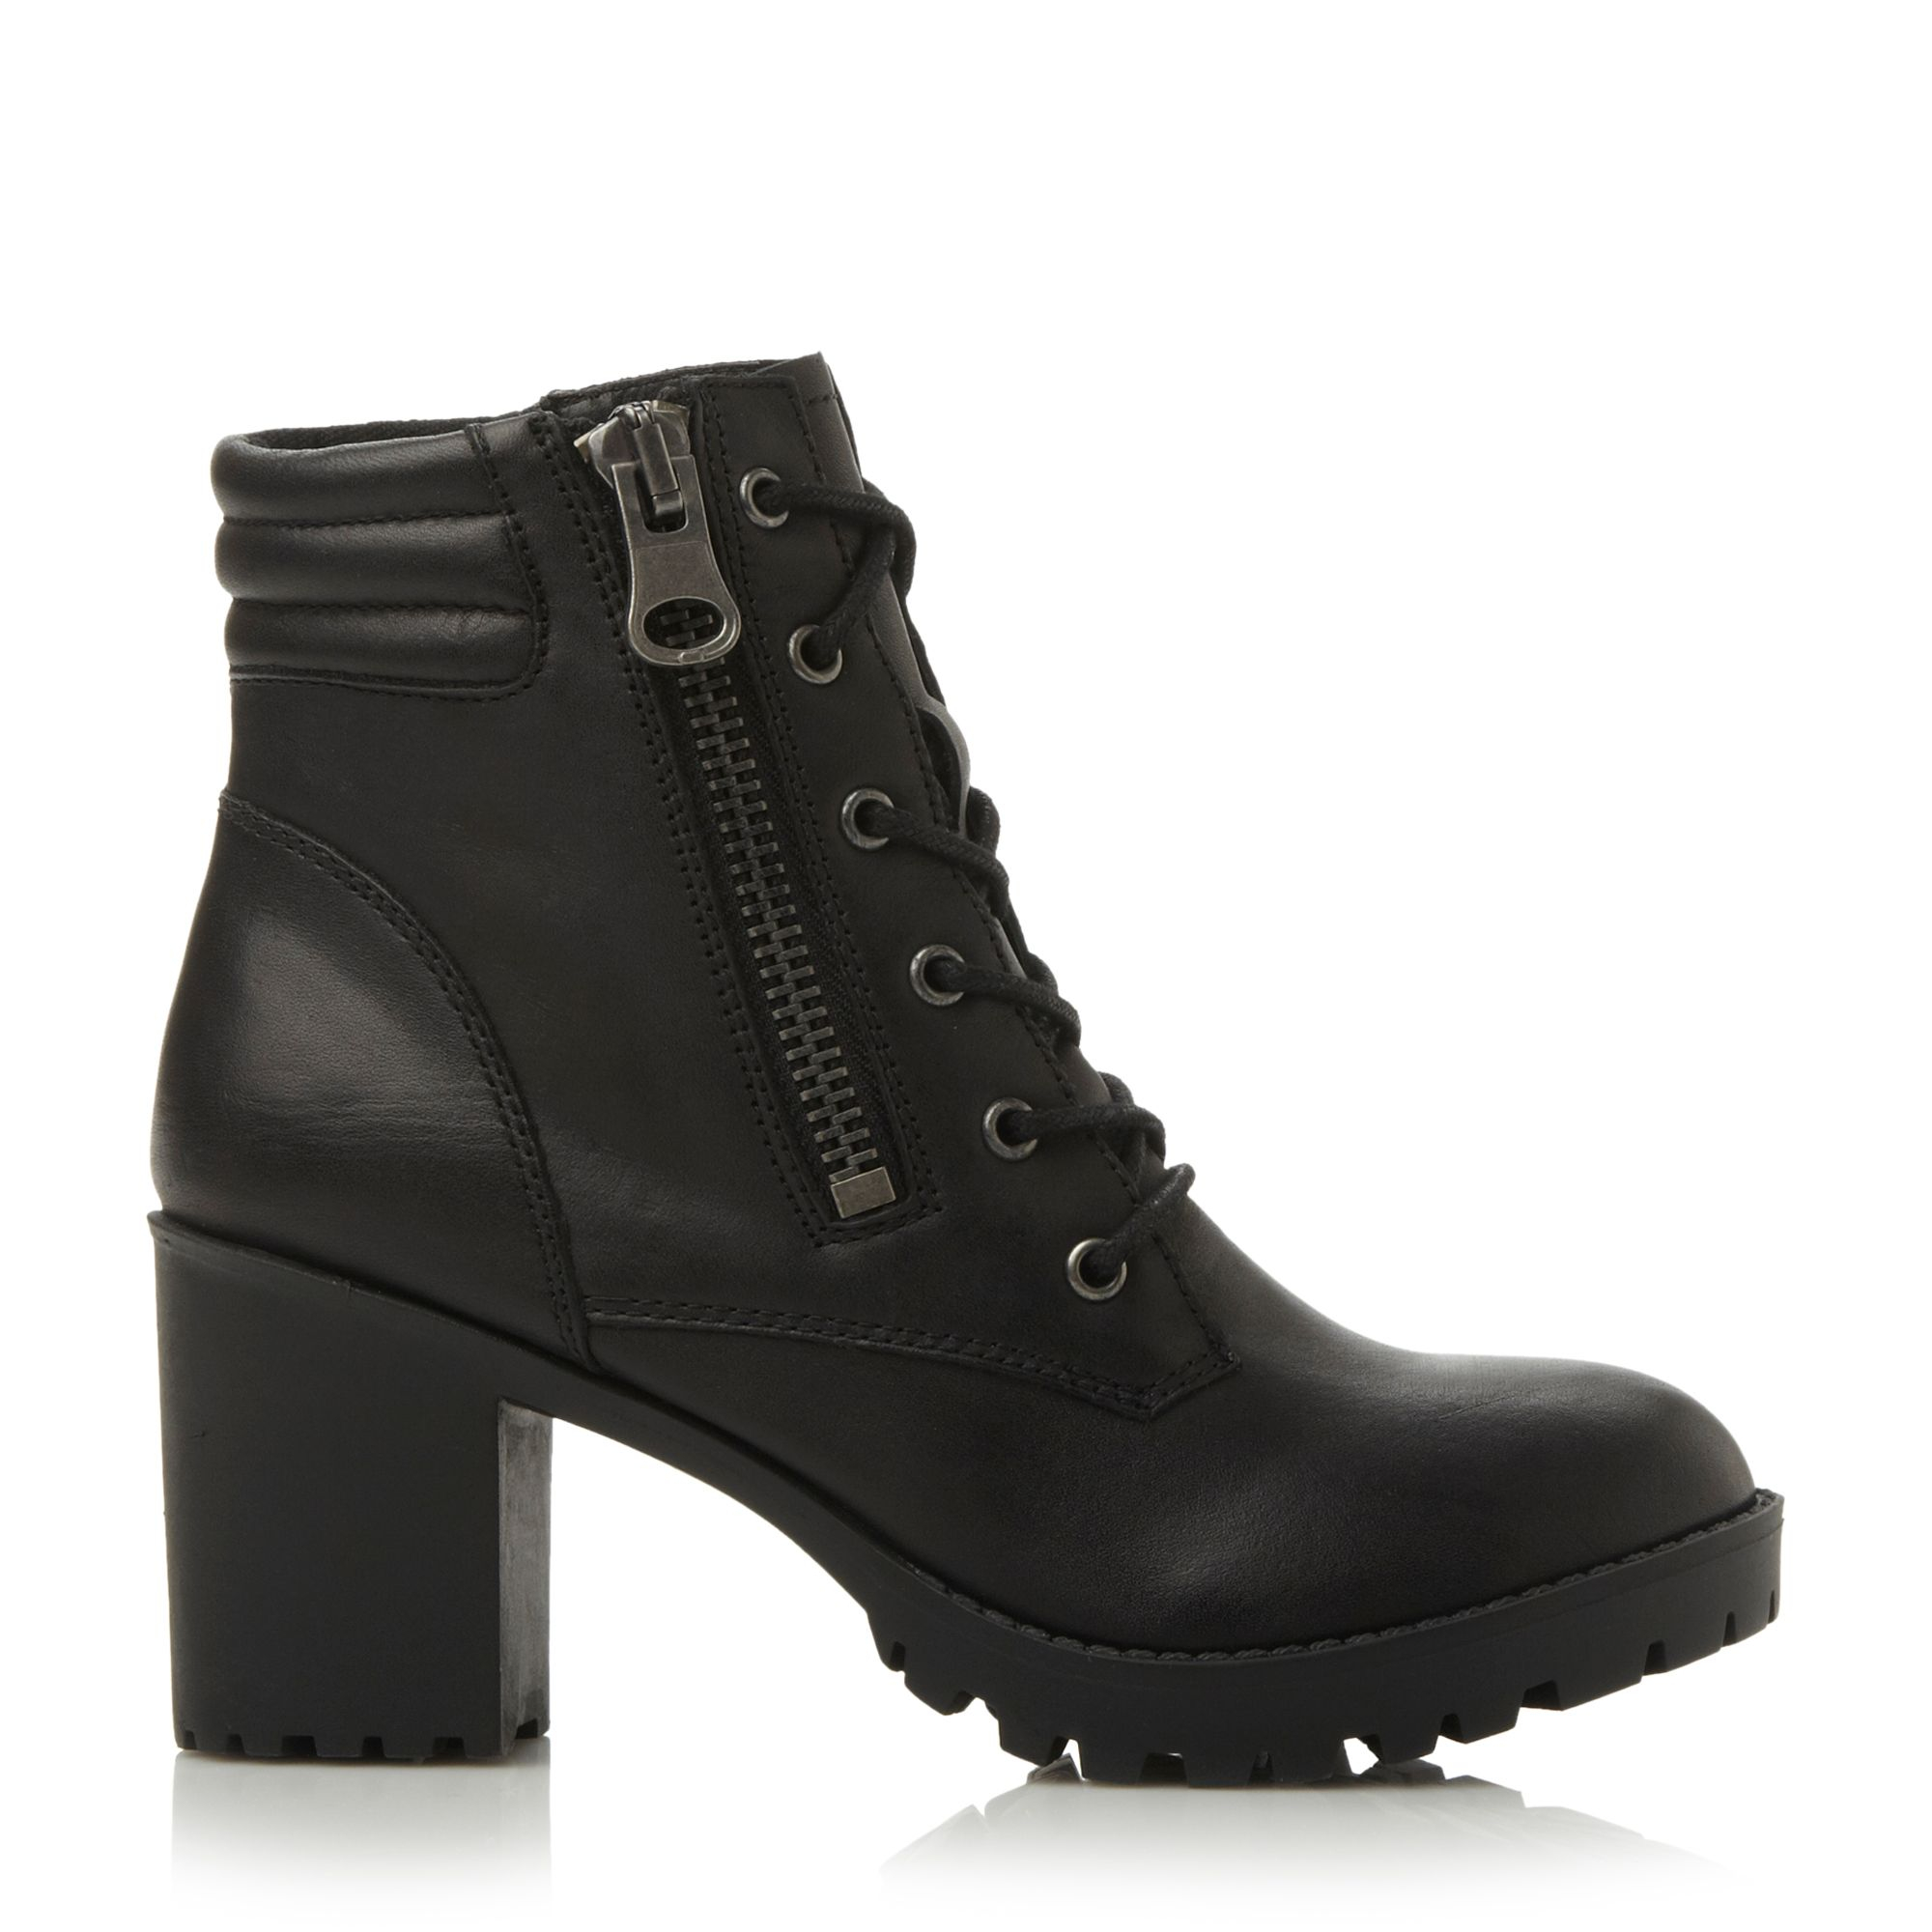 Steve Madden Noodless Lace Up Ankle Boot in Black Leather (Black) - Lyst